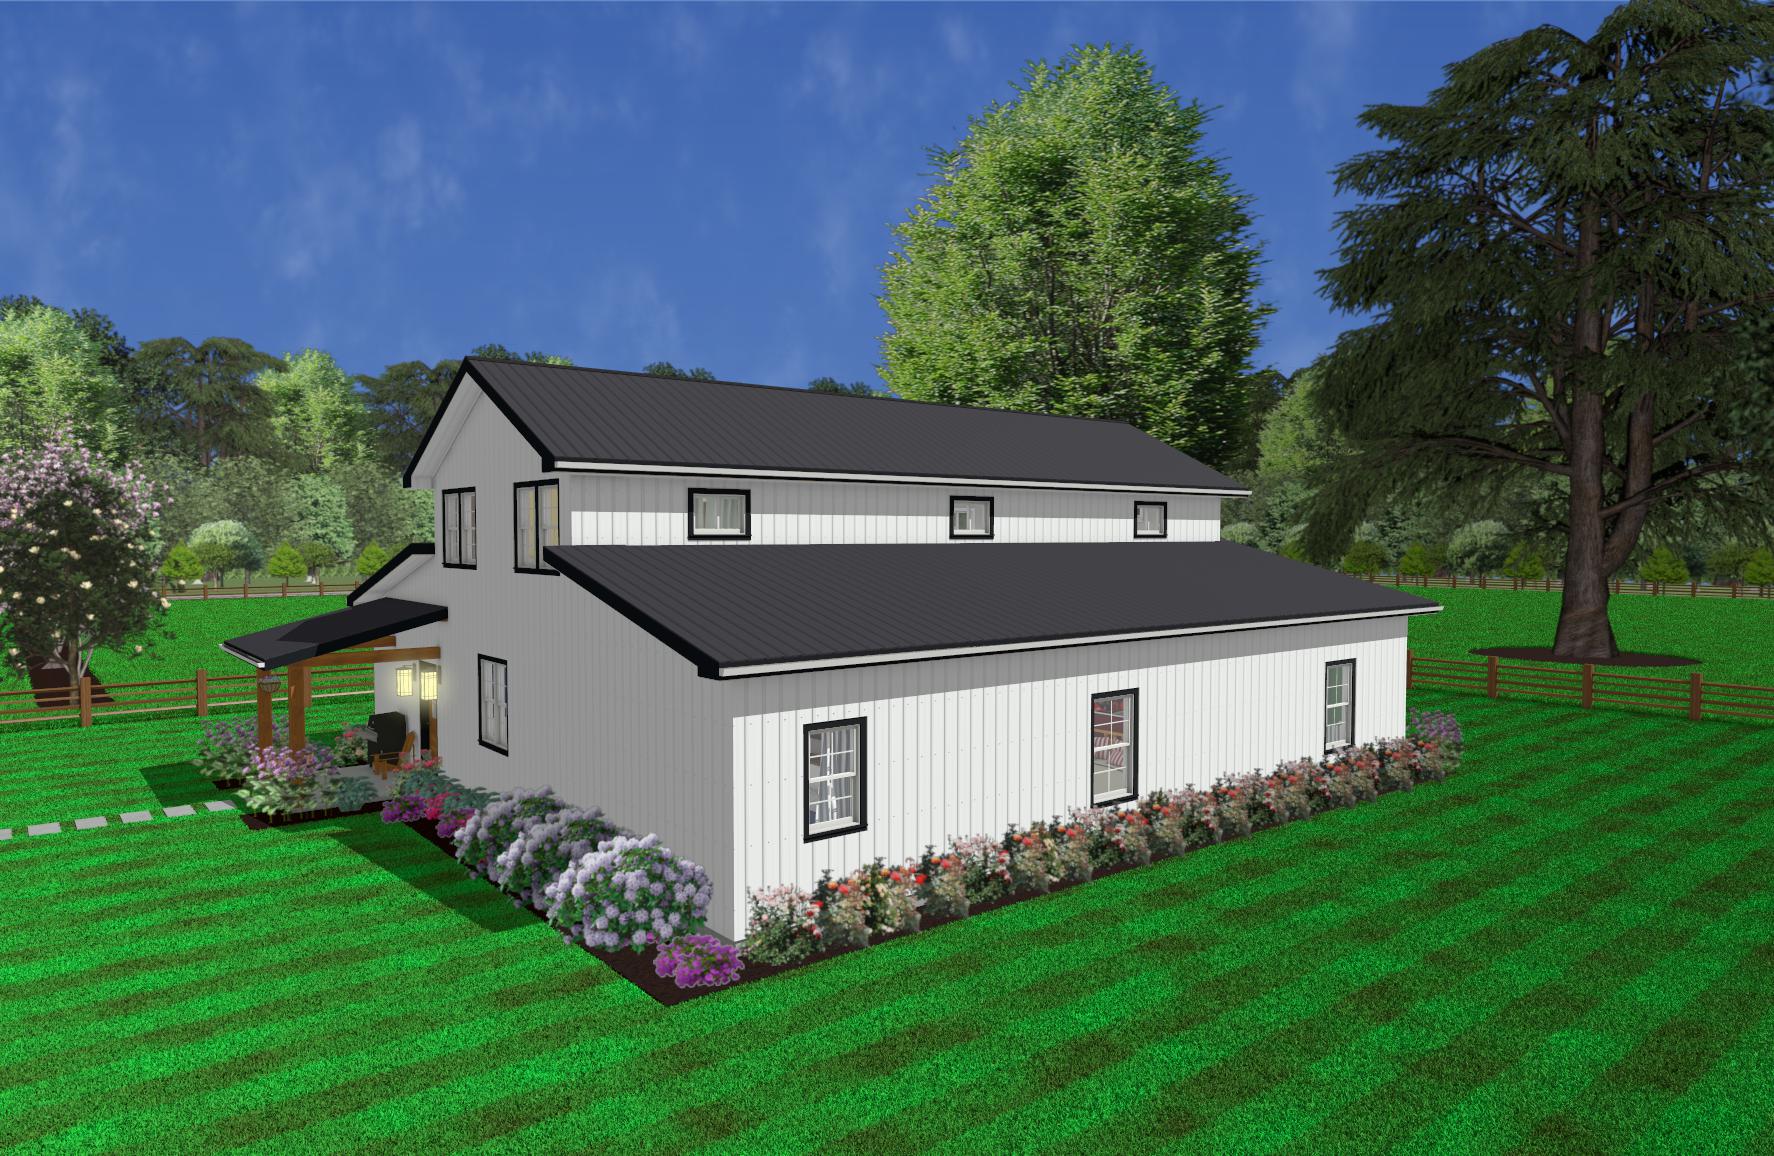 back and side view of a 2-story Lexington Barndominium